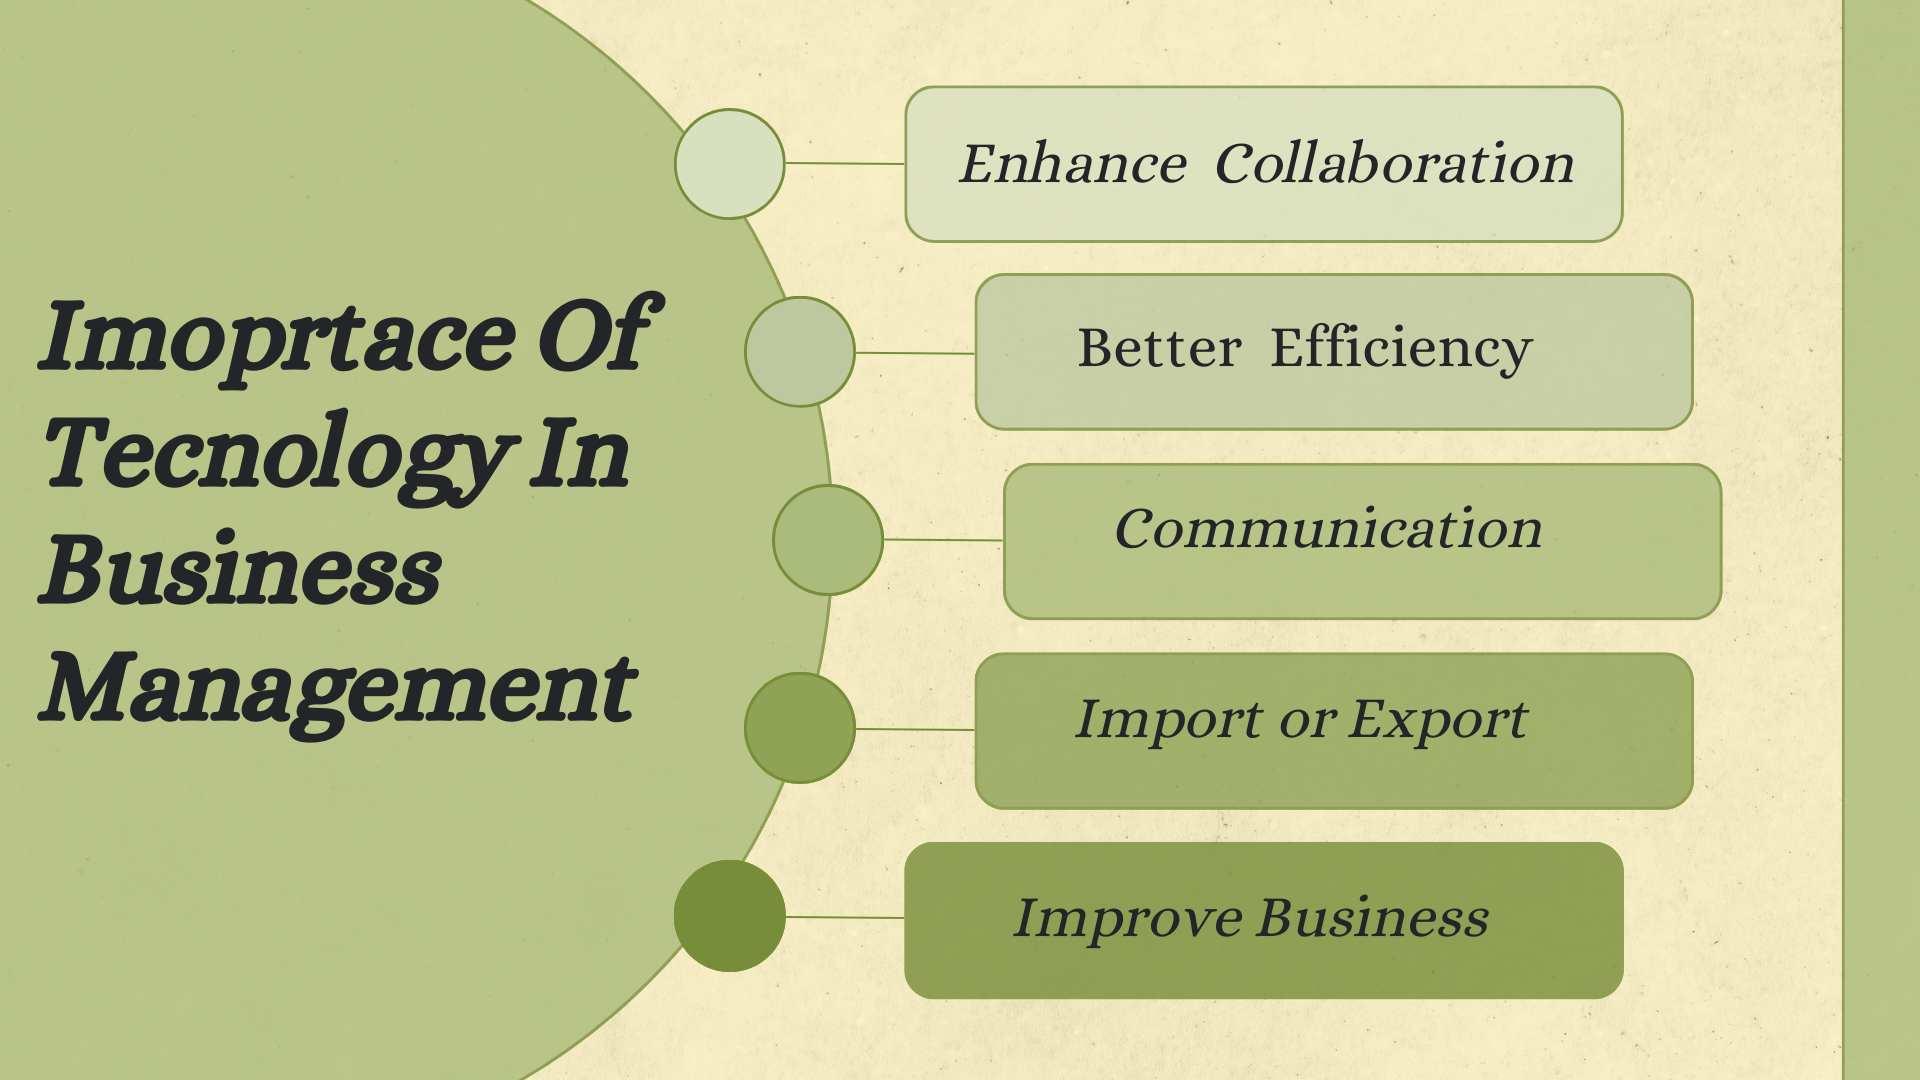 What is the Importance of Technology in Business Management?